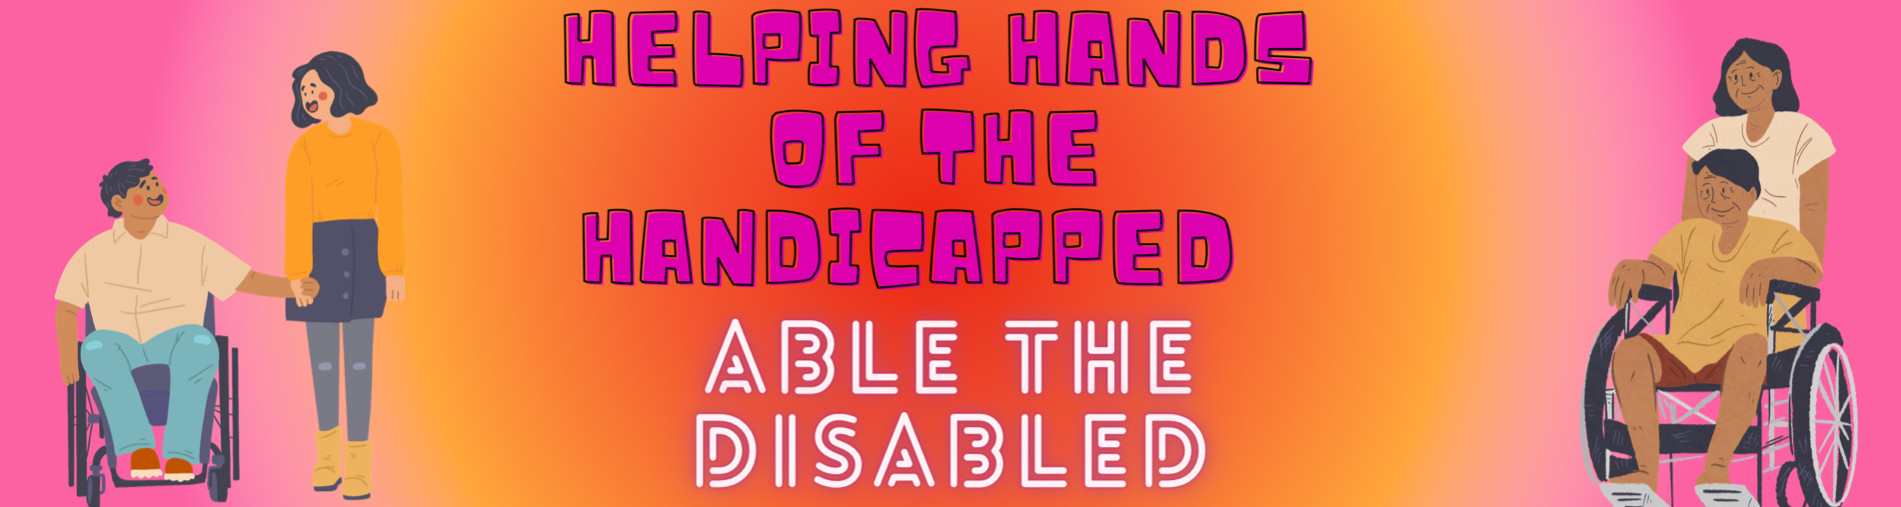 Helping hands of the handicapped 